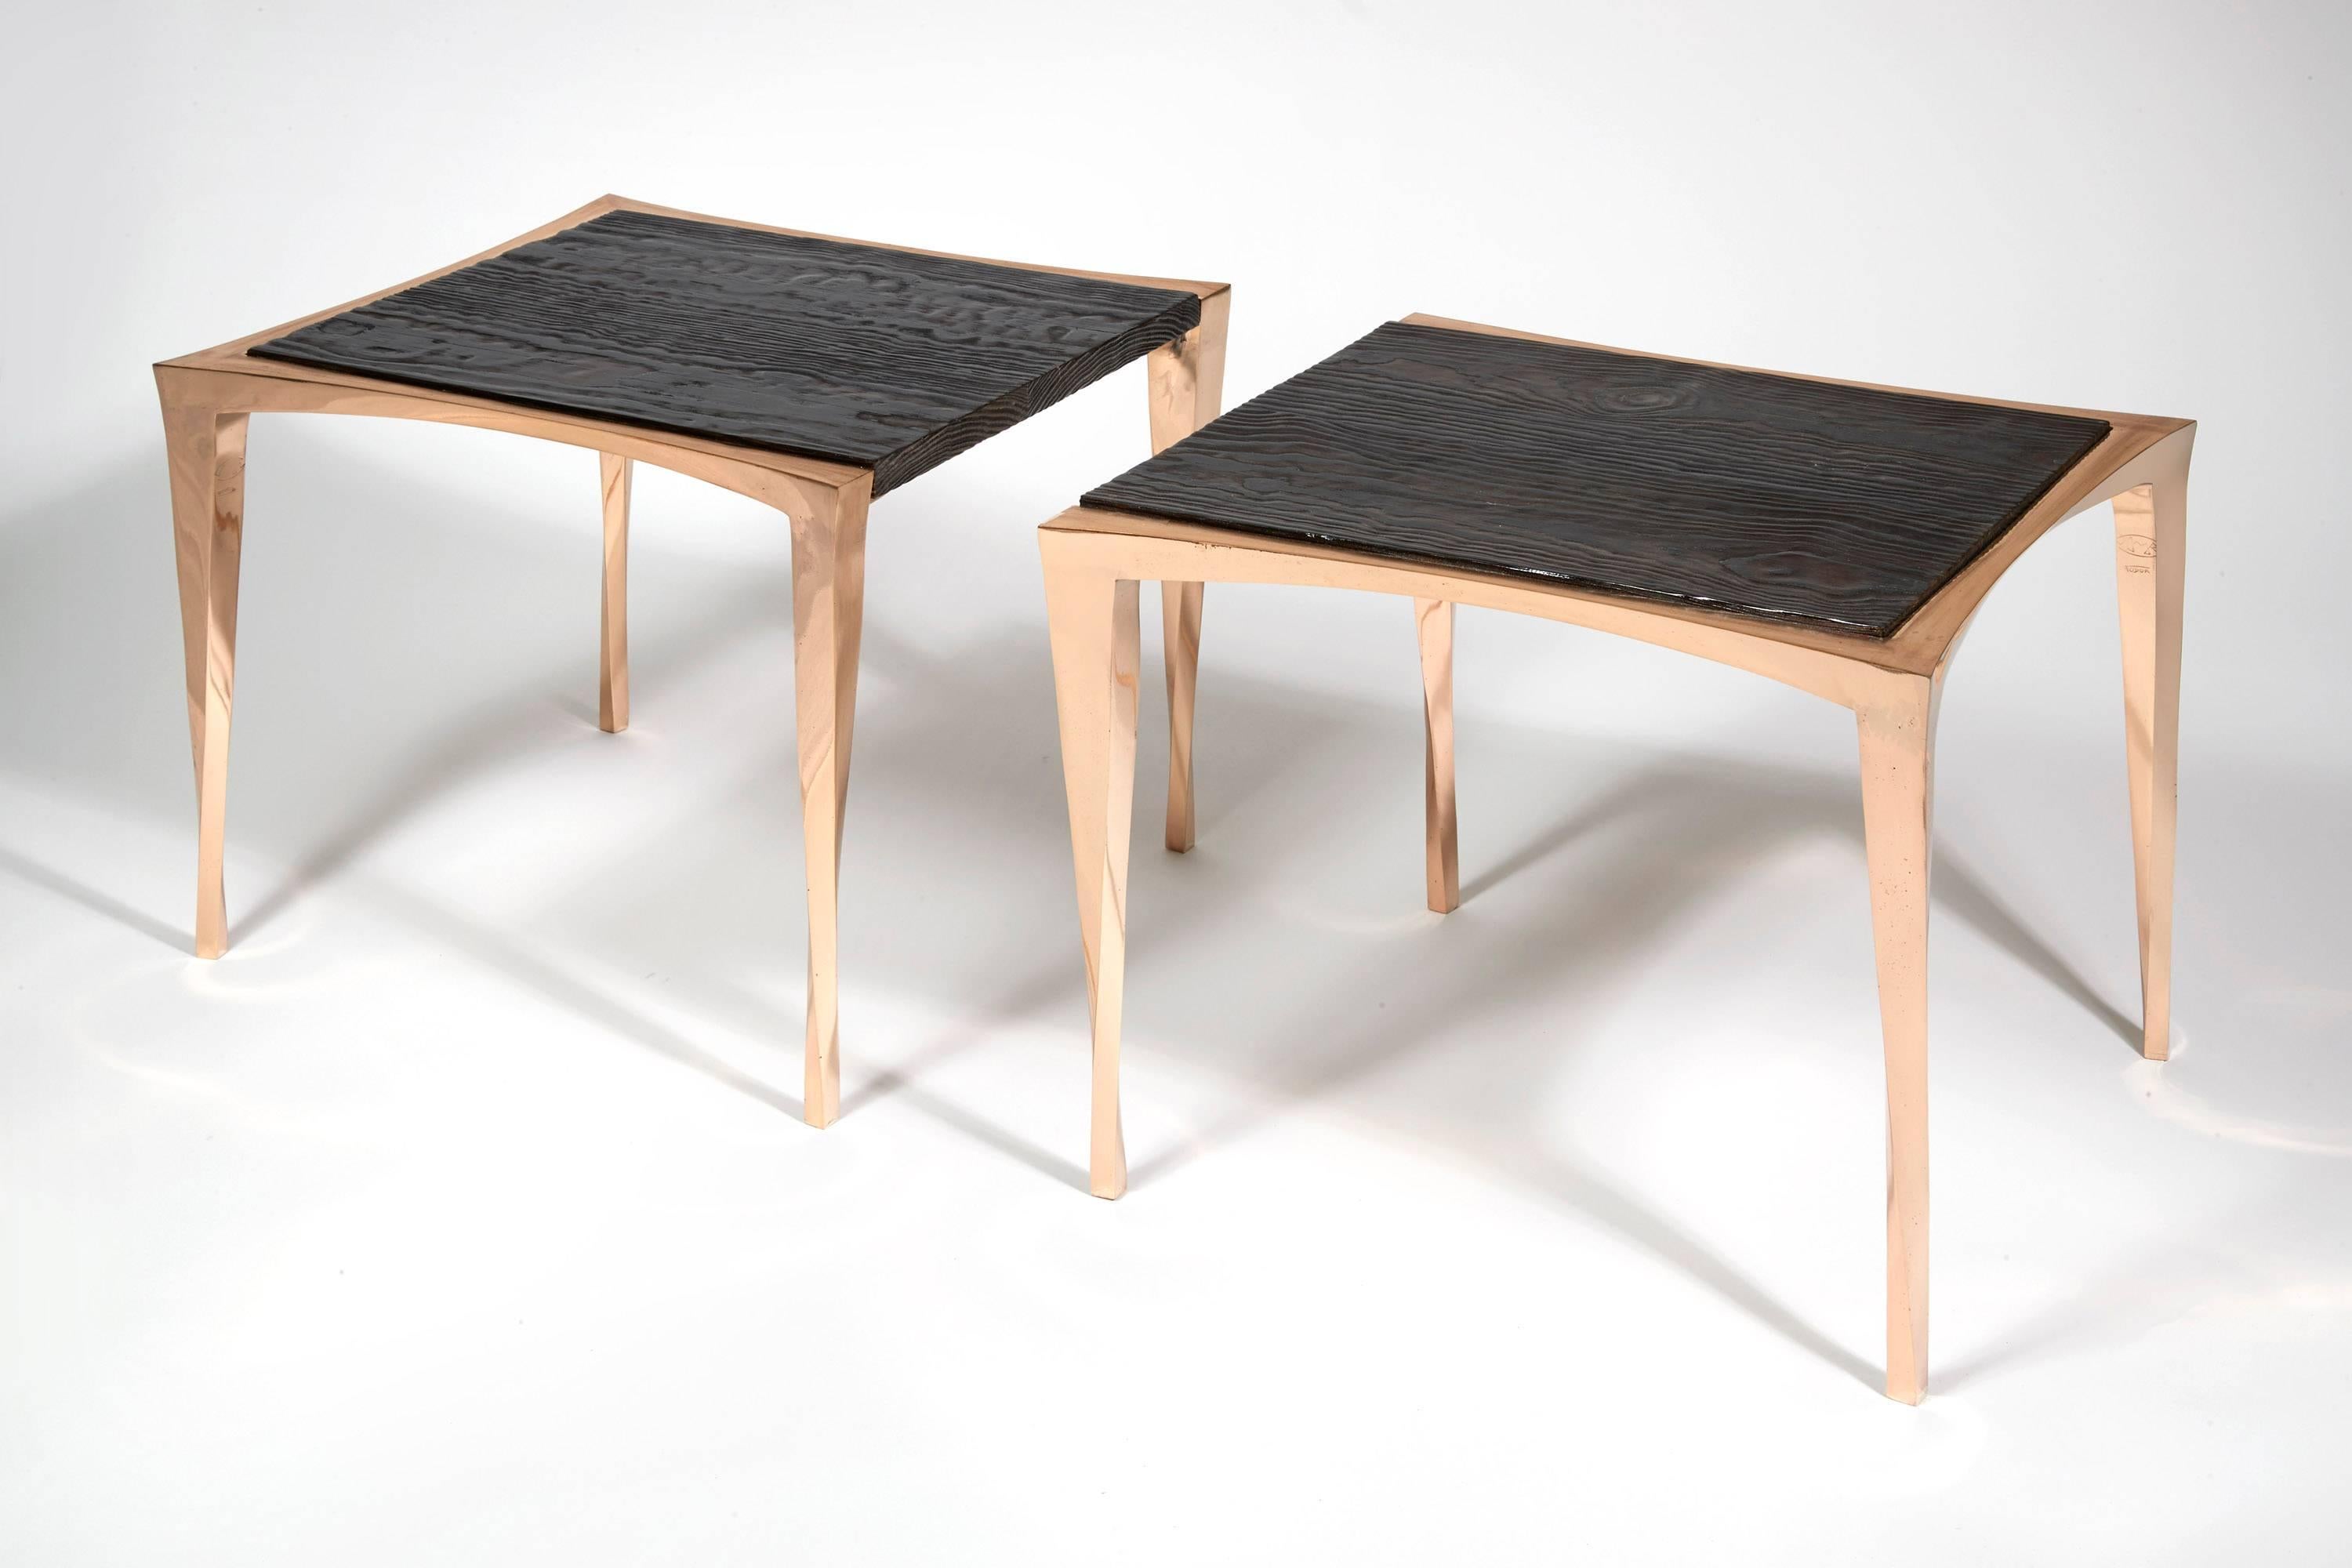 French Pair of Bronze and Burnt Pinewood Side Tables by Anasthasia Millot & WH Studio For Sale